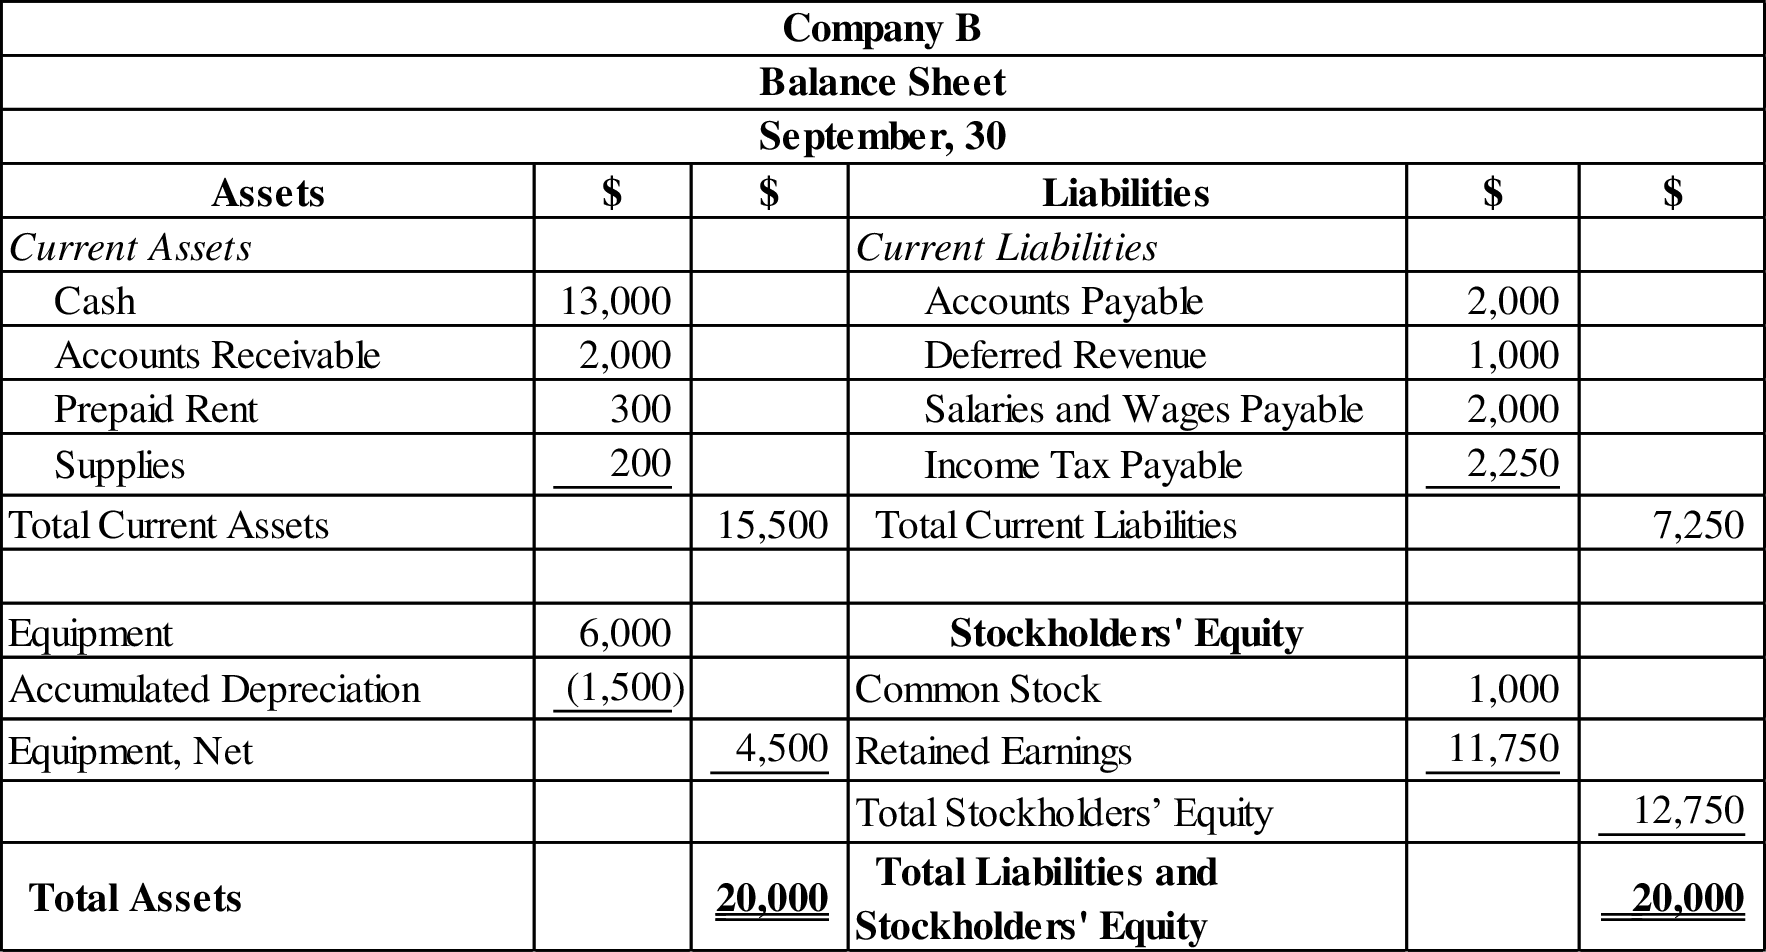 FUNDAMENTALS OF FINANCIAL ACCOUNTING LL, Chapter 4, Problem 20E 